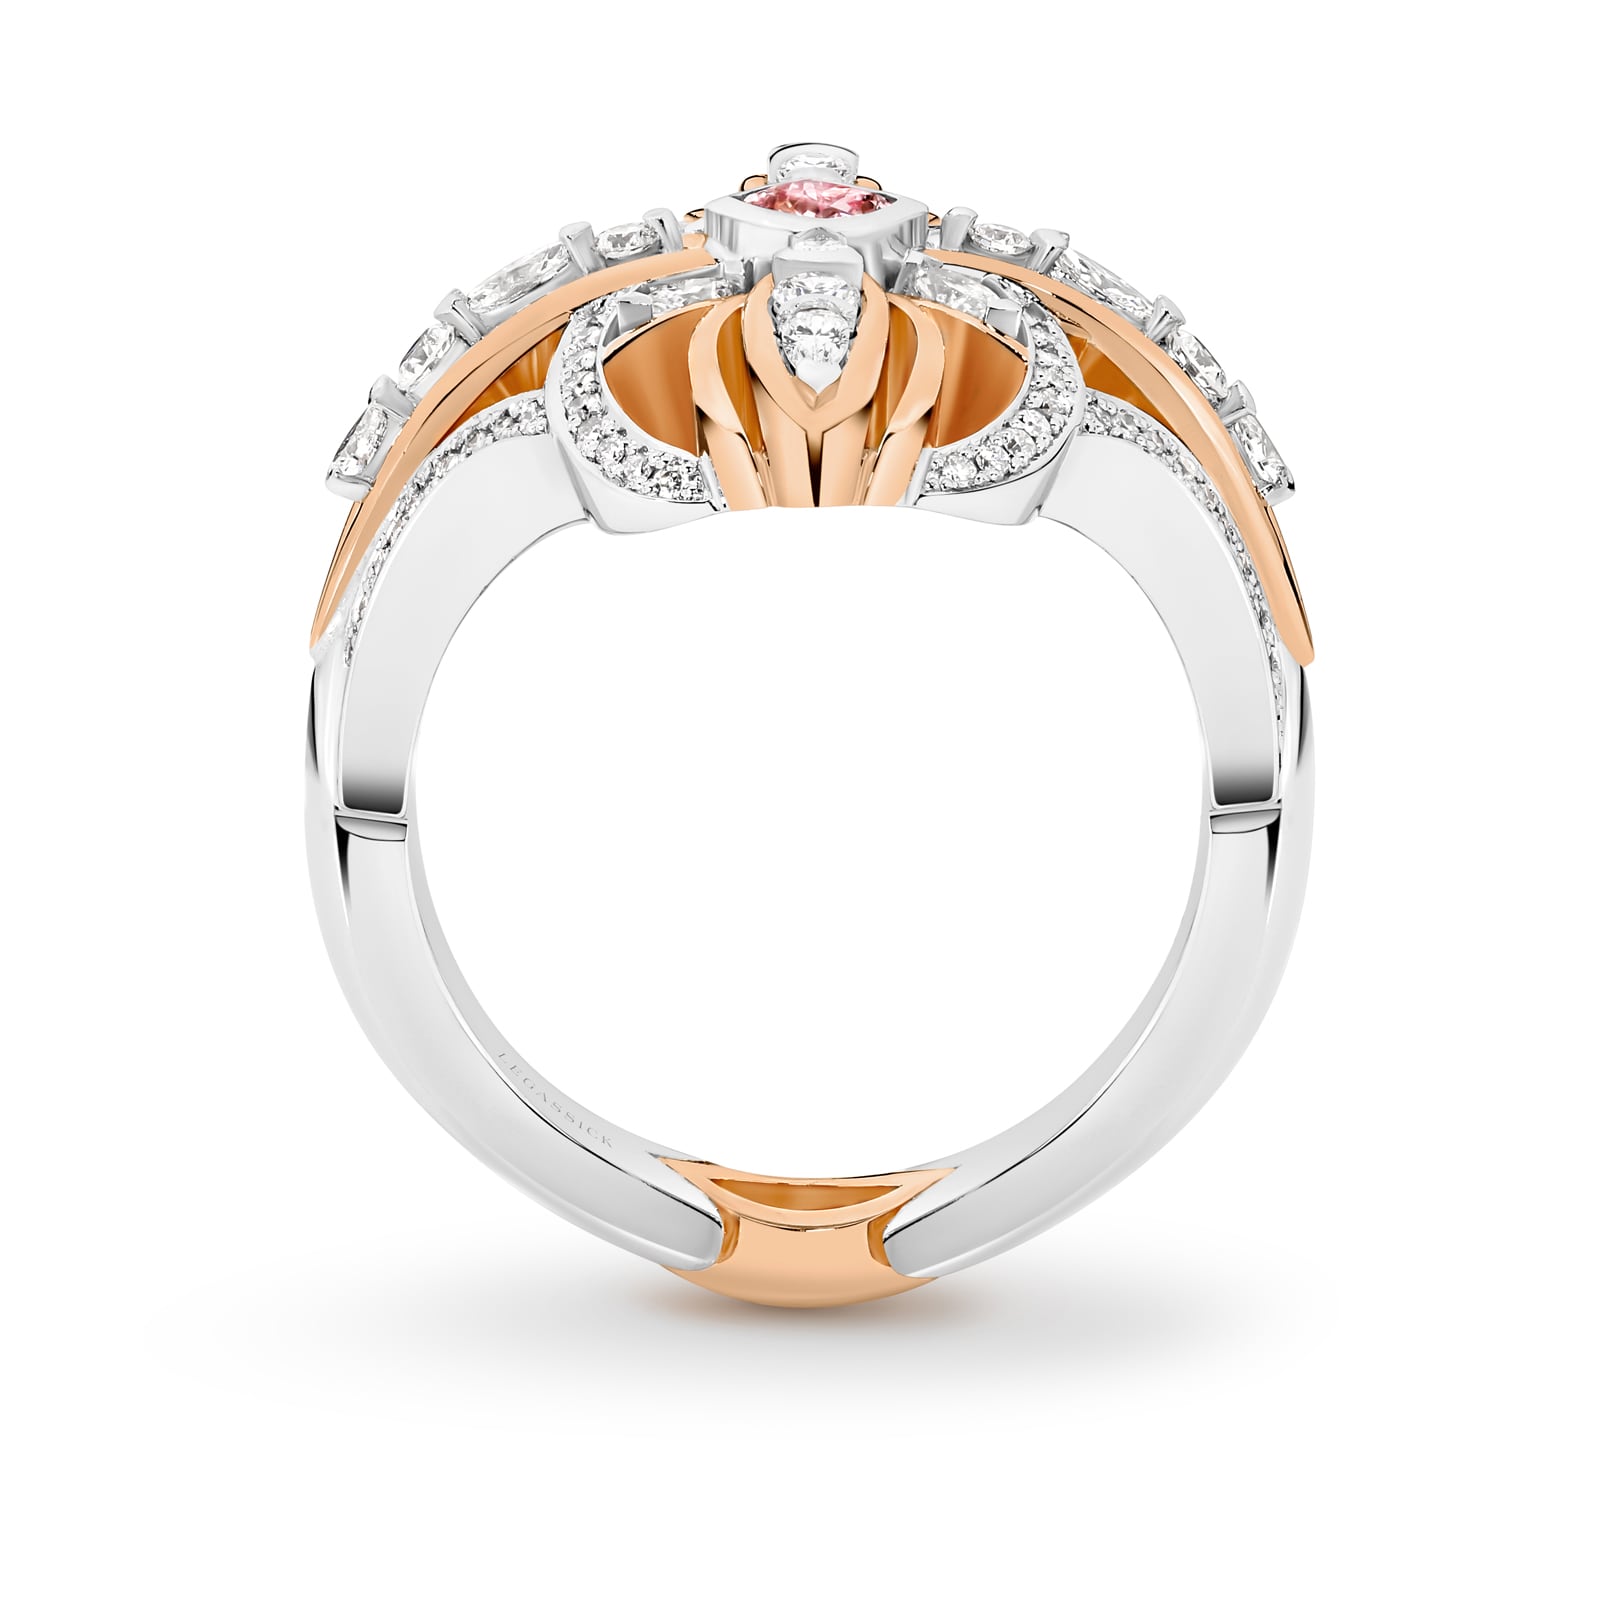 Nareece is a rare natural cushion-cut pink diamond ring set in white and rose gold. She was designed and handcrafted by LeGassick's Master Jewellers, Gold Coast, Australia.